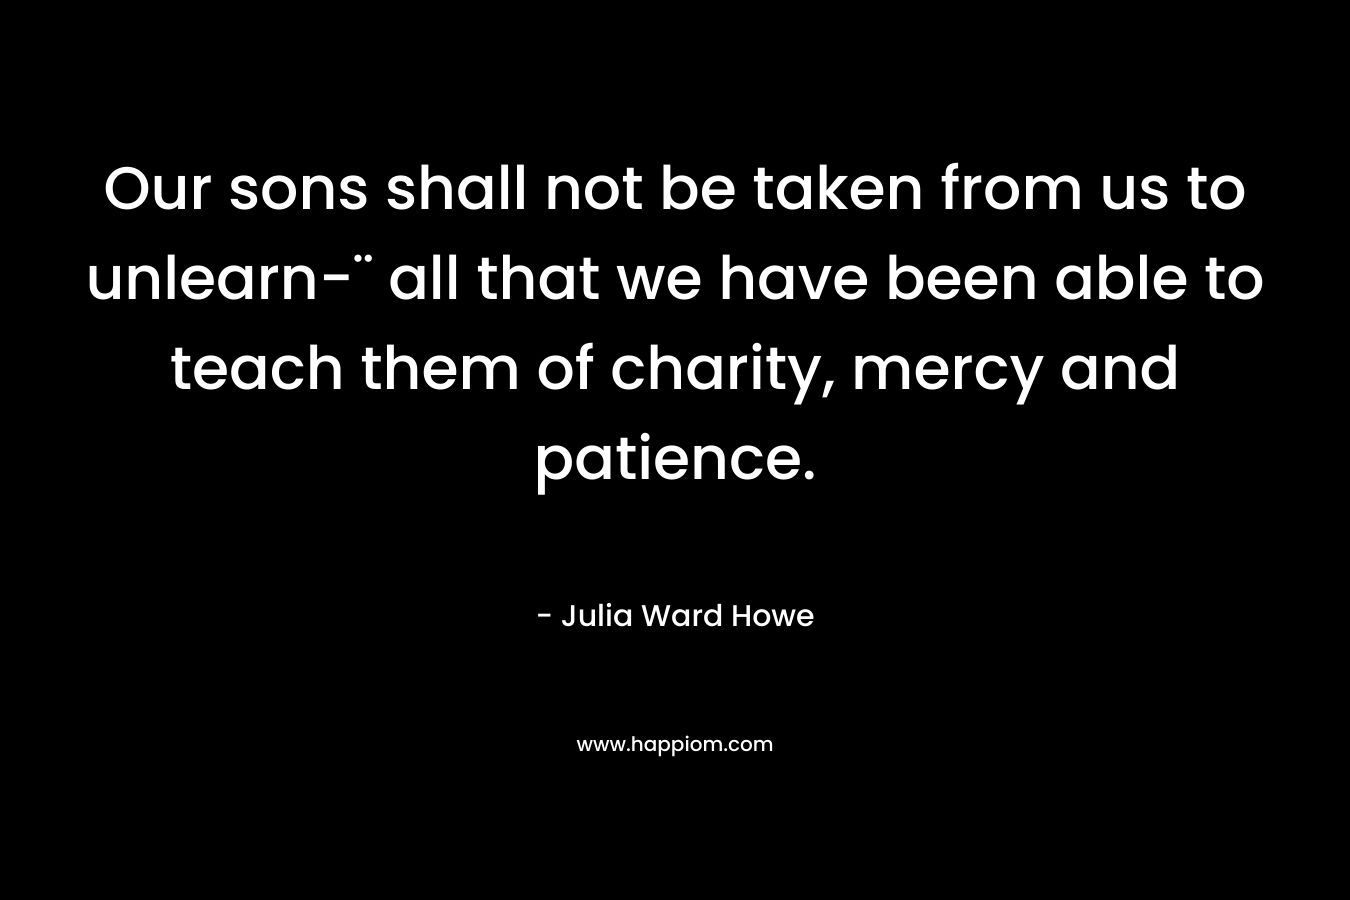 Our sons shall not be taken from us to unlearn-¨ all that we have been able to teach them of charity, mercy and patience. – Julia Ward Howe